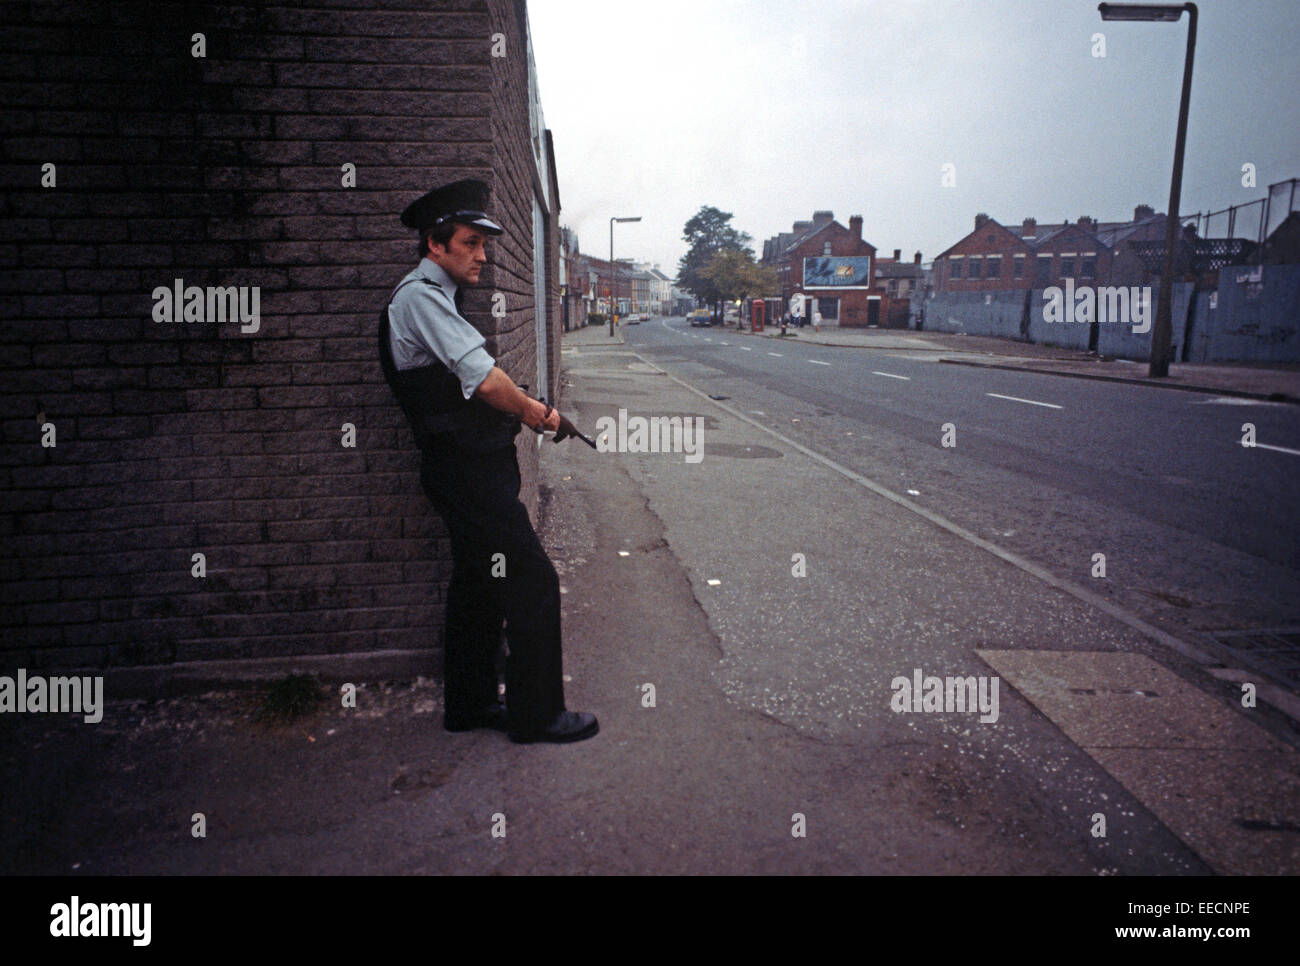 BELFAST, UNITED KINGDOM - SEPTEMBER 1978. RUC, Royal Ulster Constabulary, policeman on Patrol of East Belfast Streets during The Troubles, Northern Ireland. Stock Photo